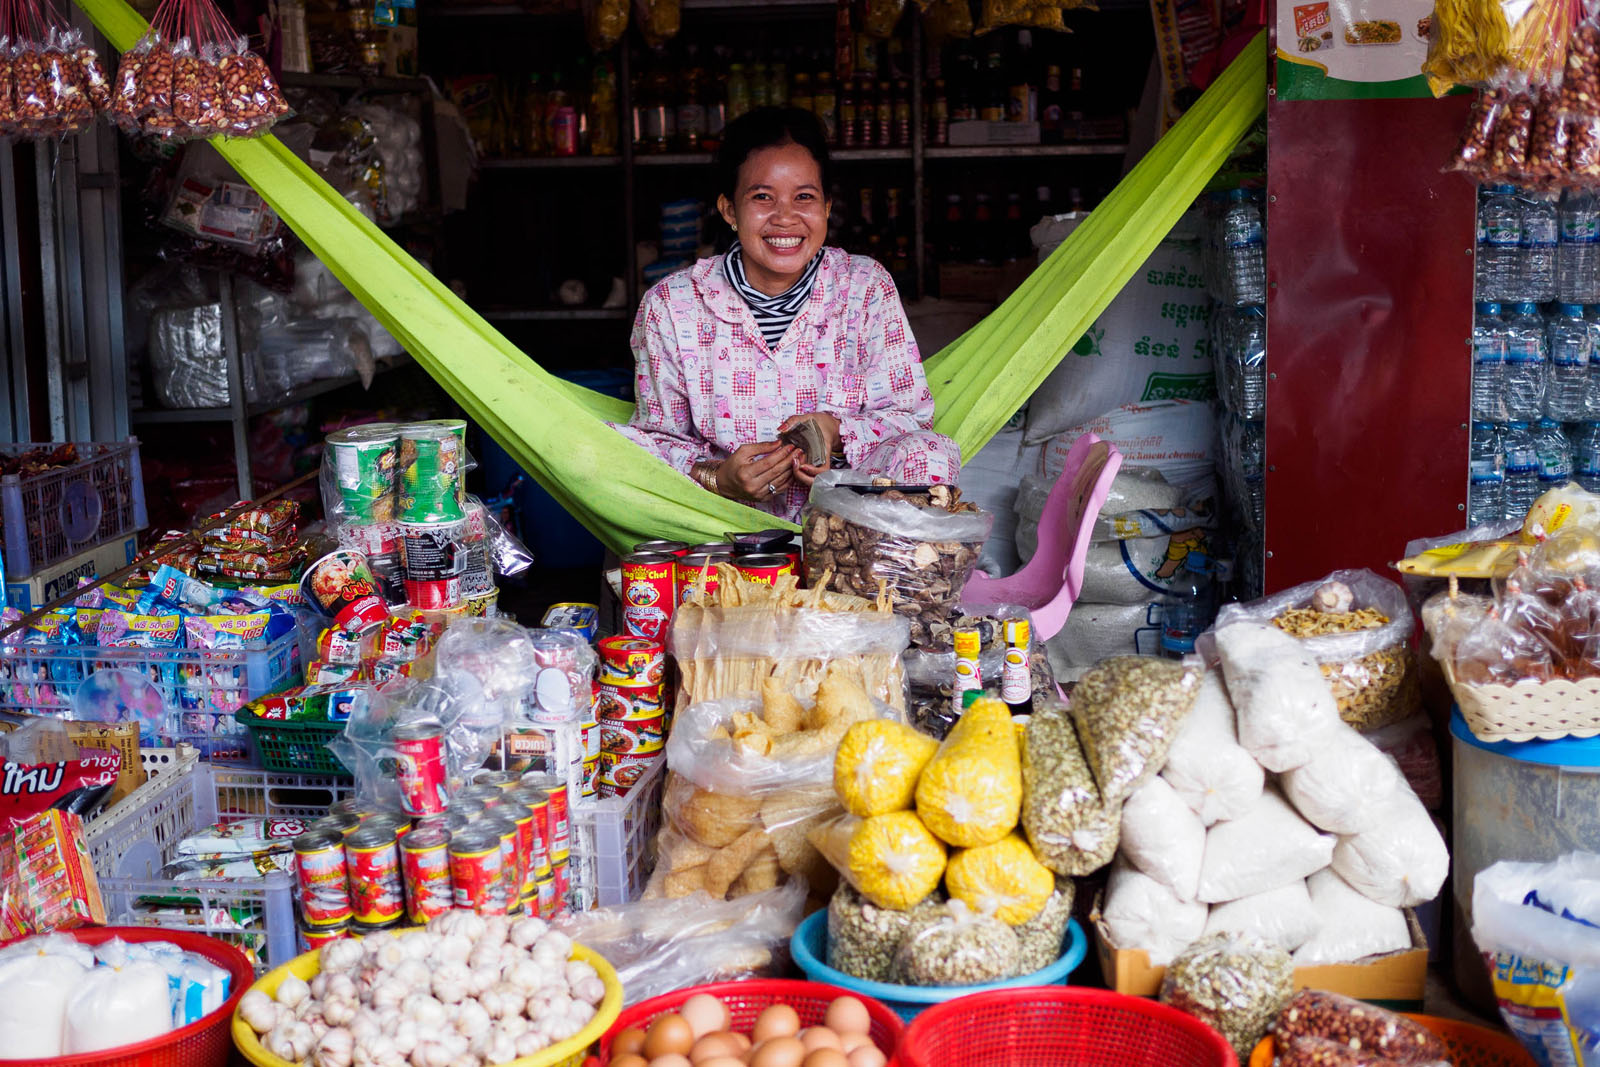 A woman sells packaged food at the local market. Being so close to the Thai border, a lot of goods are imported. Photo by Emily Lush